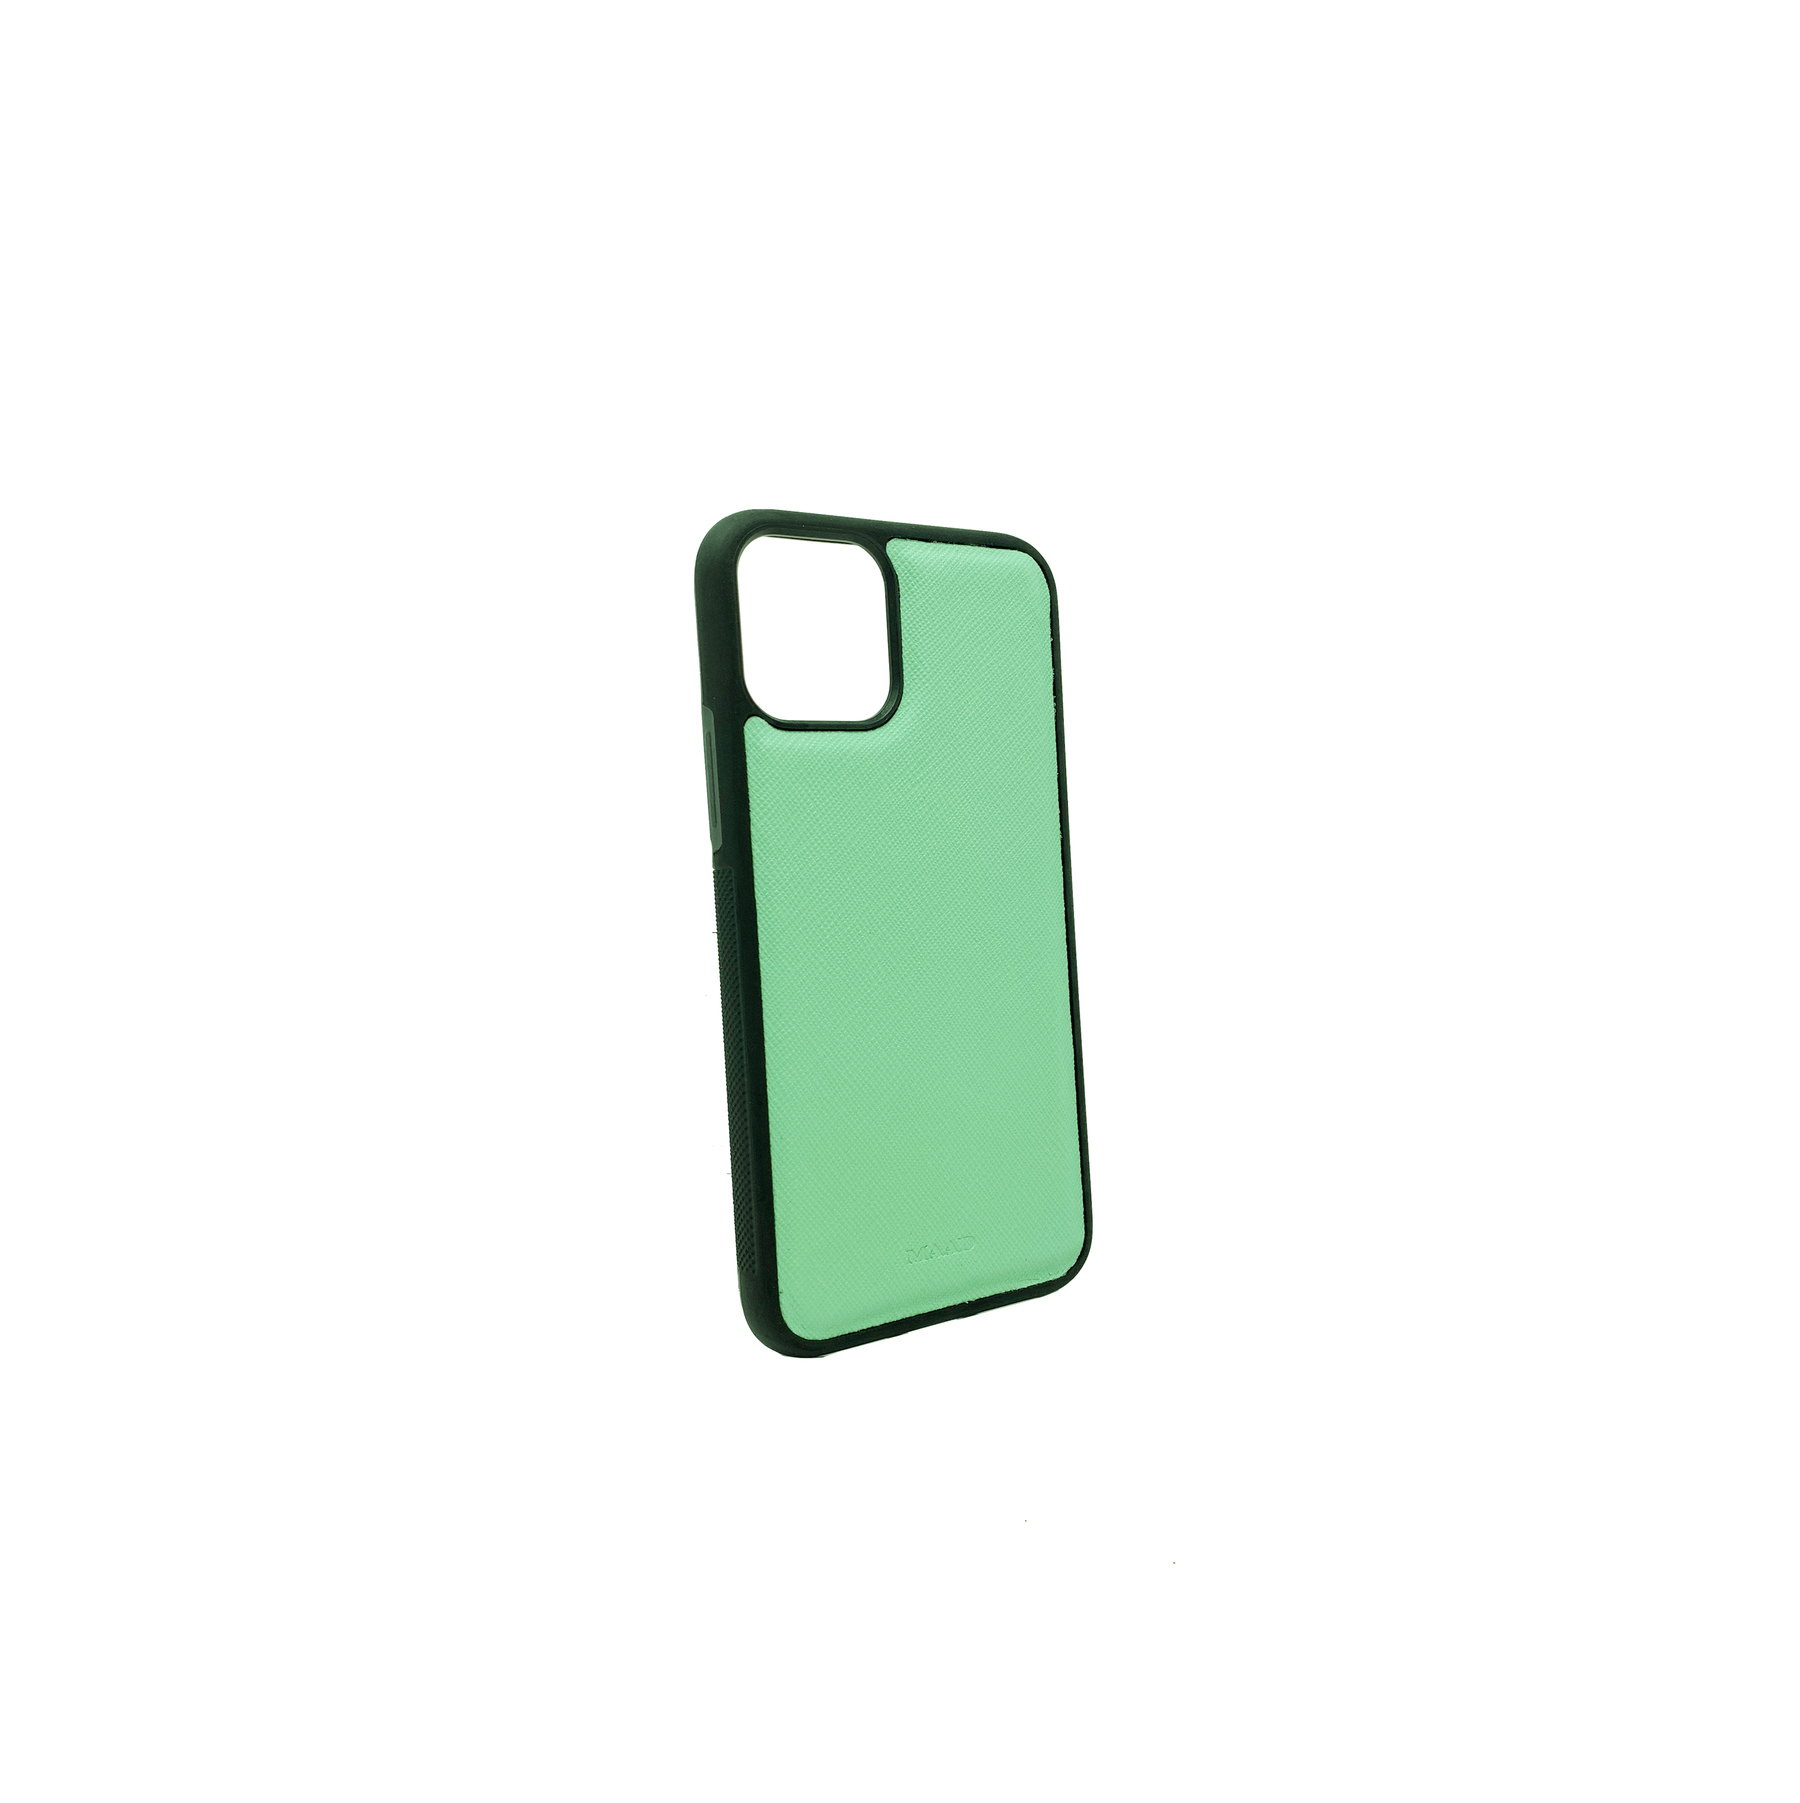 Mint IPhone 11 Pro Case - MAAD Collective - Saffiano IPhone Personalized Case 